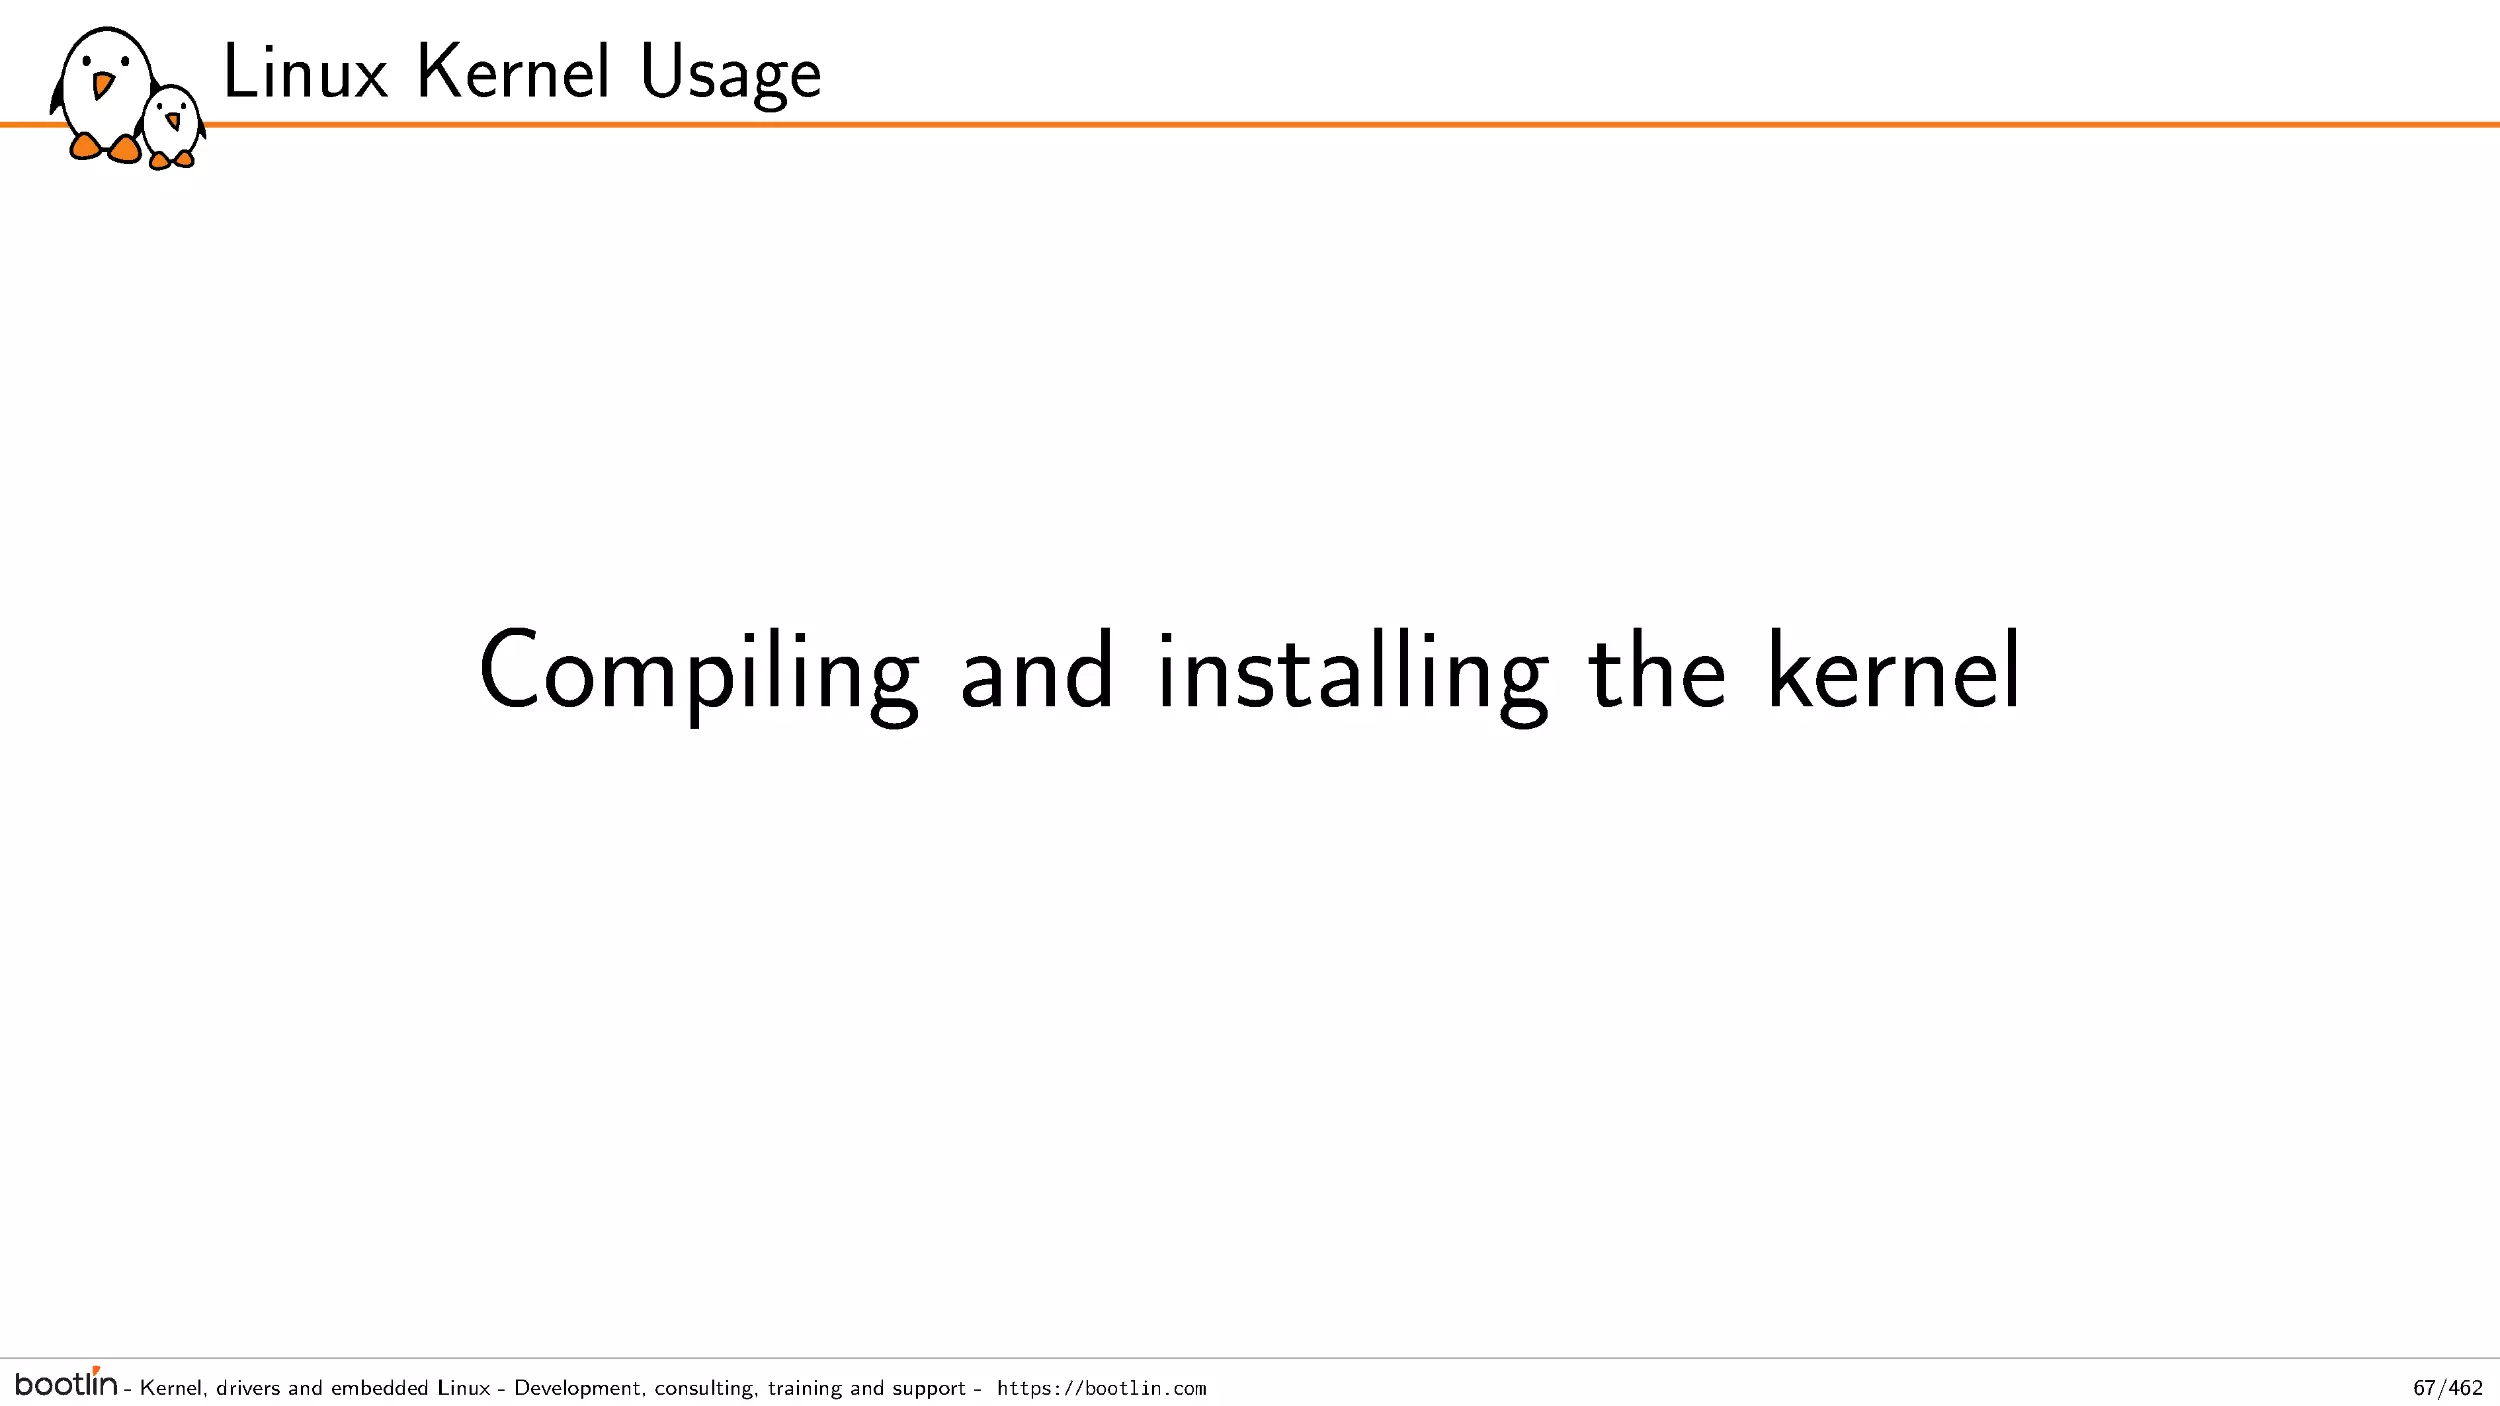 Compiling and installing the kernel